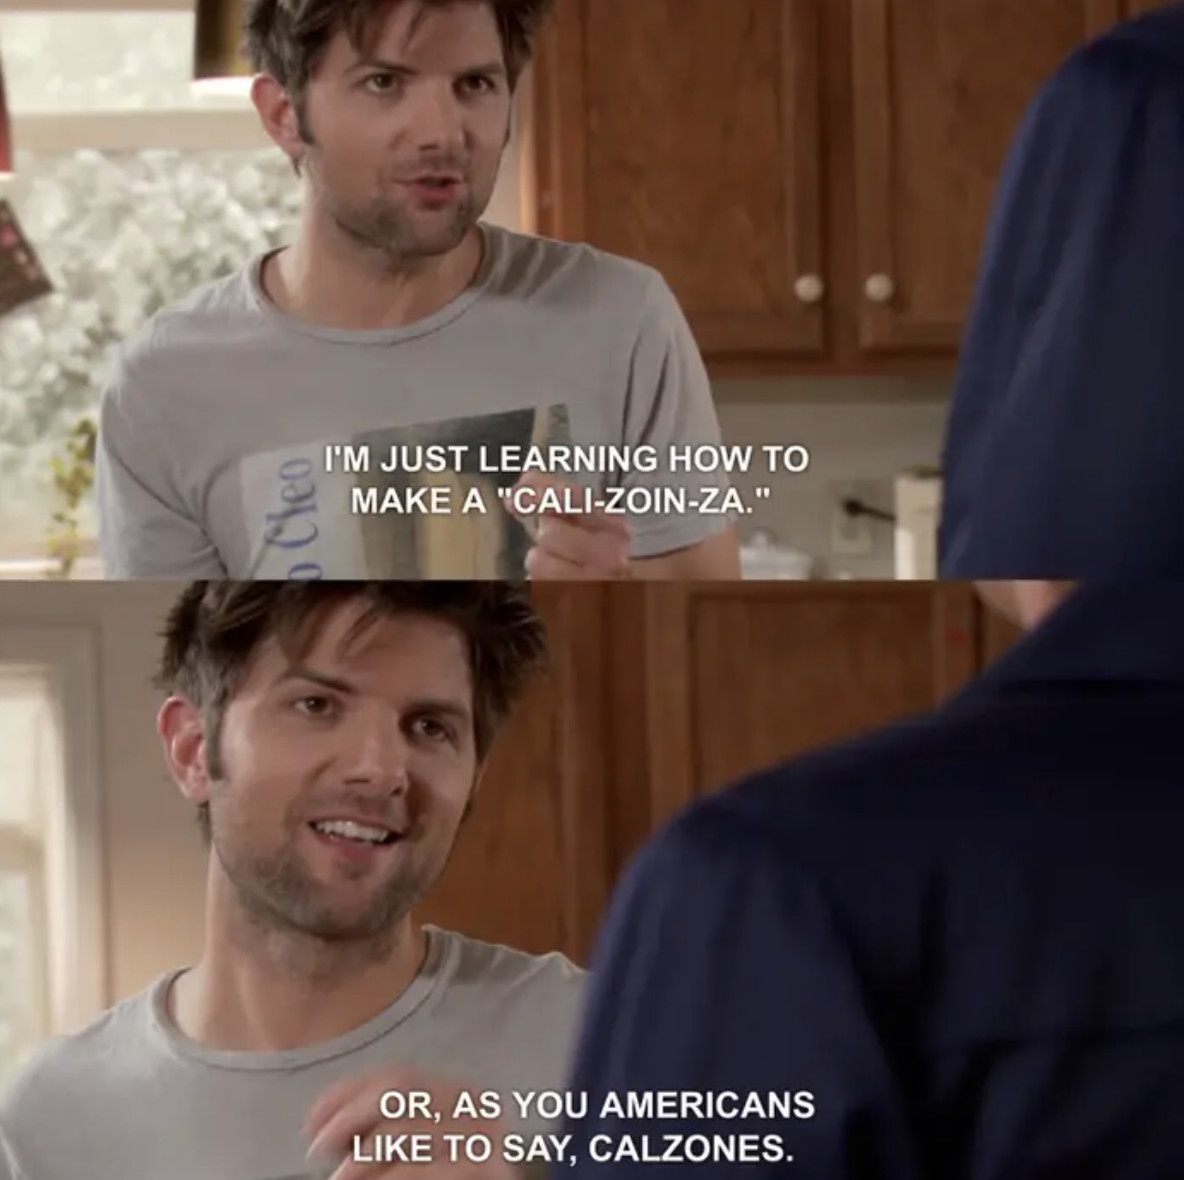 Adam Scott saying he&#x27;s learning how to make a &quot;Cali-zoin-za,&quot; or as Americans say, &quot;Calzones&quot;